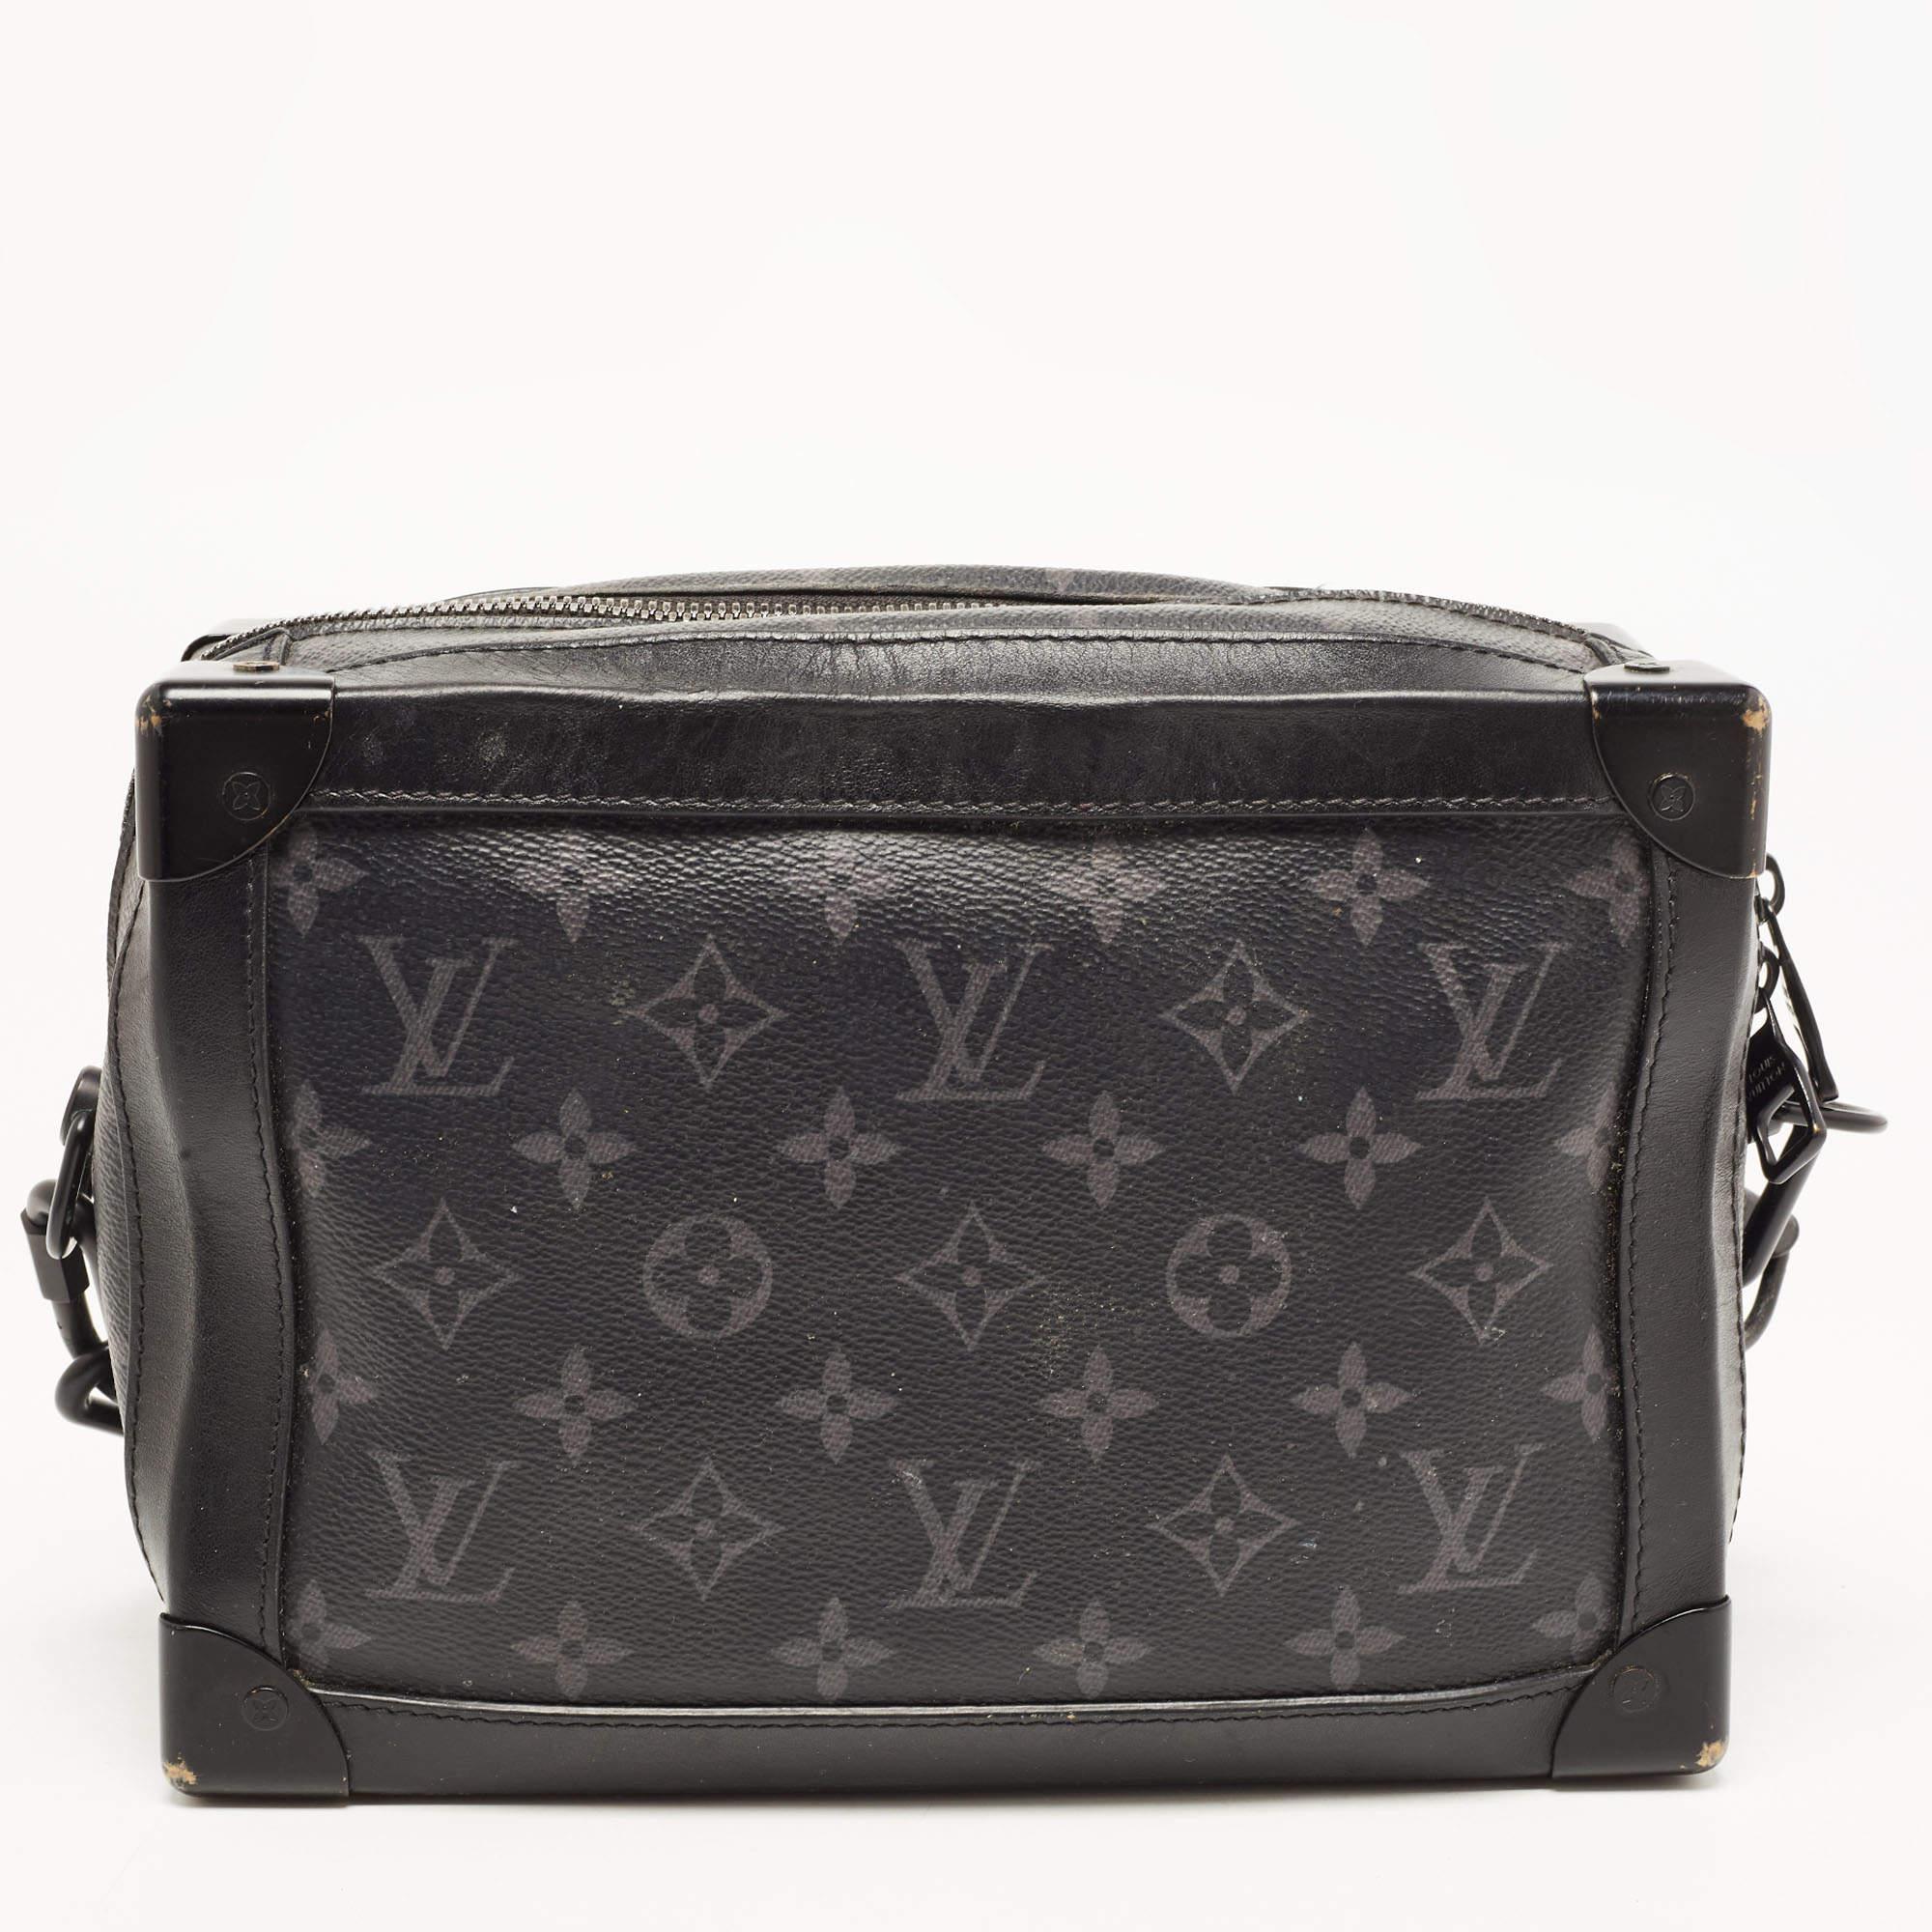 This LV Soft Trunk bag is an accessory you would go to season after season. It has been crafted using the best kind of materials to be appealing as well as durable. It's a worthy investment.

Includes: Detachable Strap